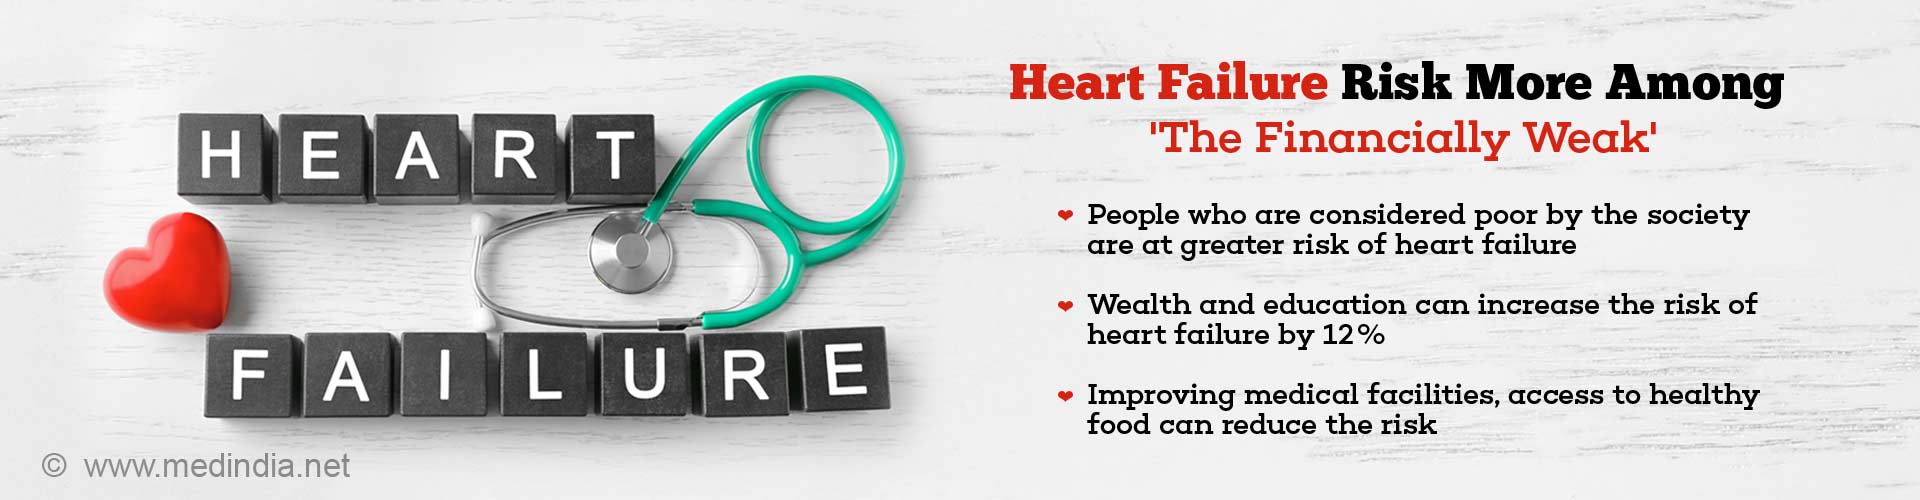 heart failure risk more among ''the financially weak''
- people who are considered poor by the society are at greater risk of heart failure
- wealth and education can increase the risk of heart failure by 12%
- improving medical facilities, access to healthy food can reduce the risk
